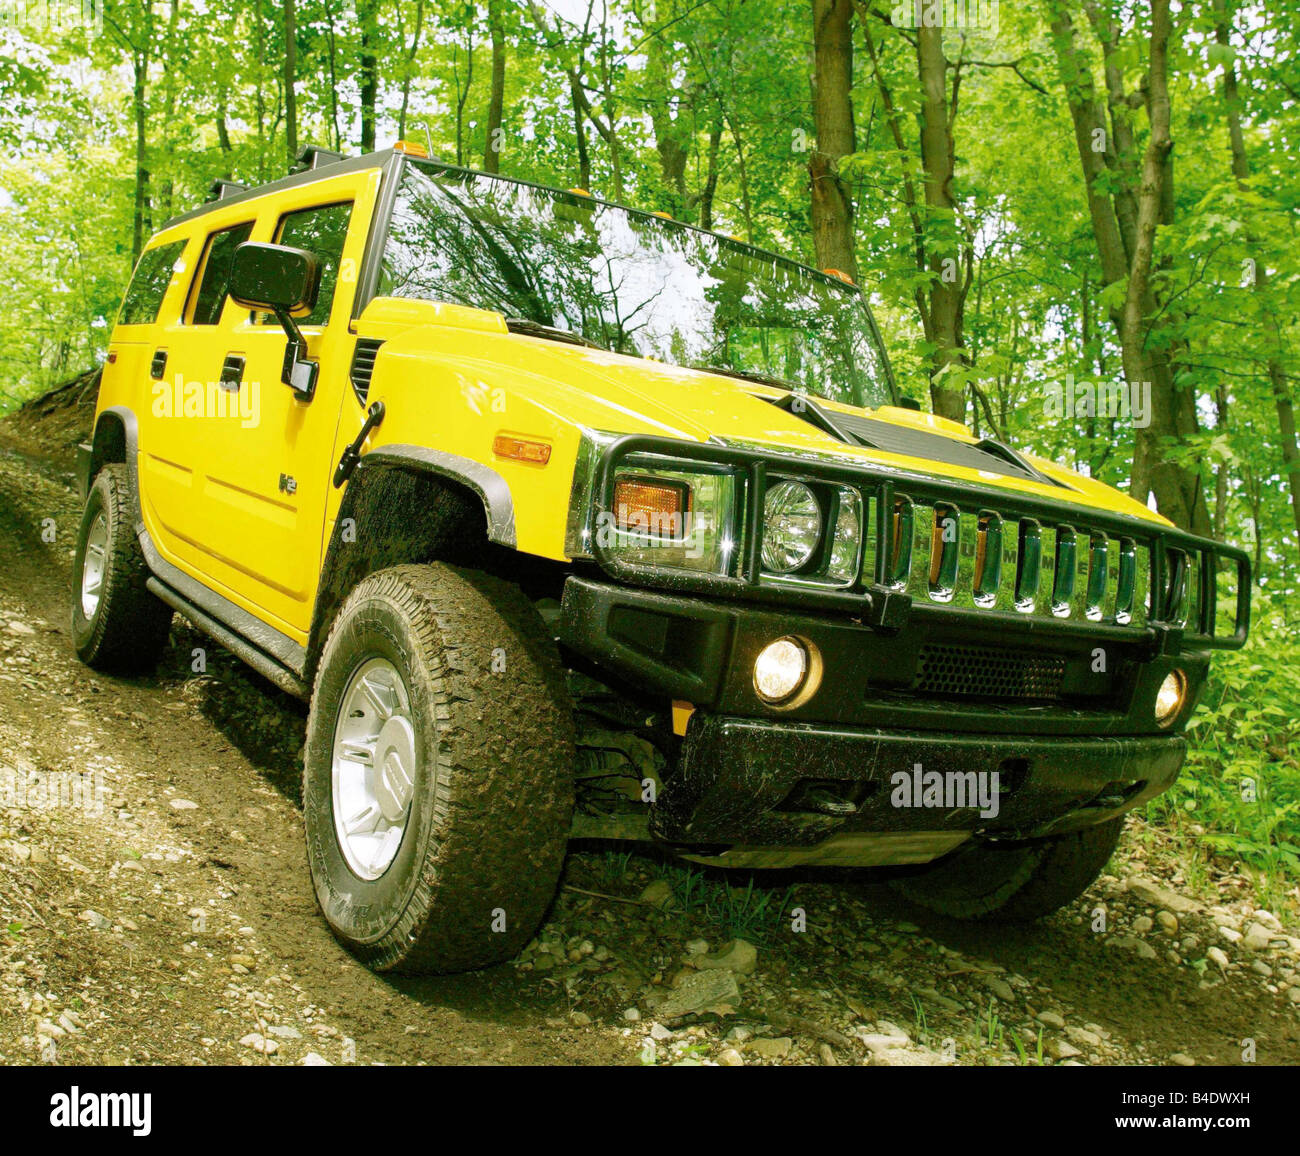 Car, Hummer H2, cross country vehicle, model year 2001-, yellow, driving, offroad, Forest, diagonal from the front, ams 26/2002, Stock Photo